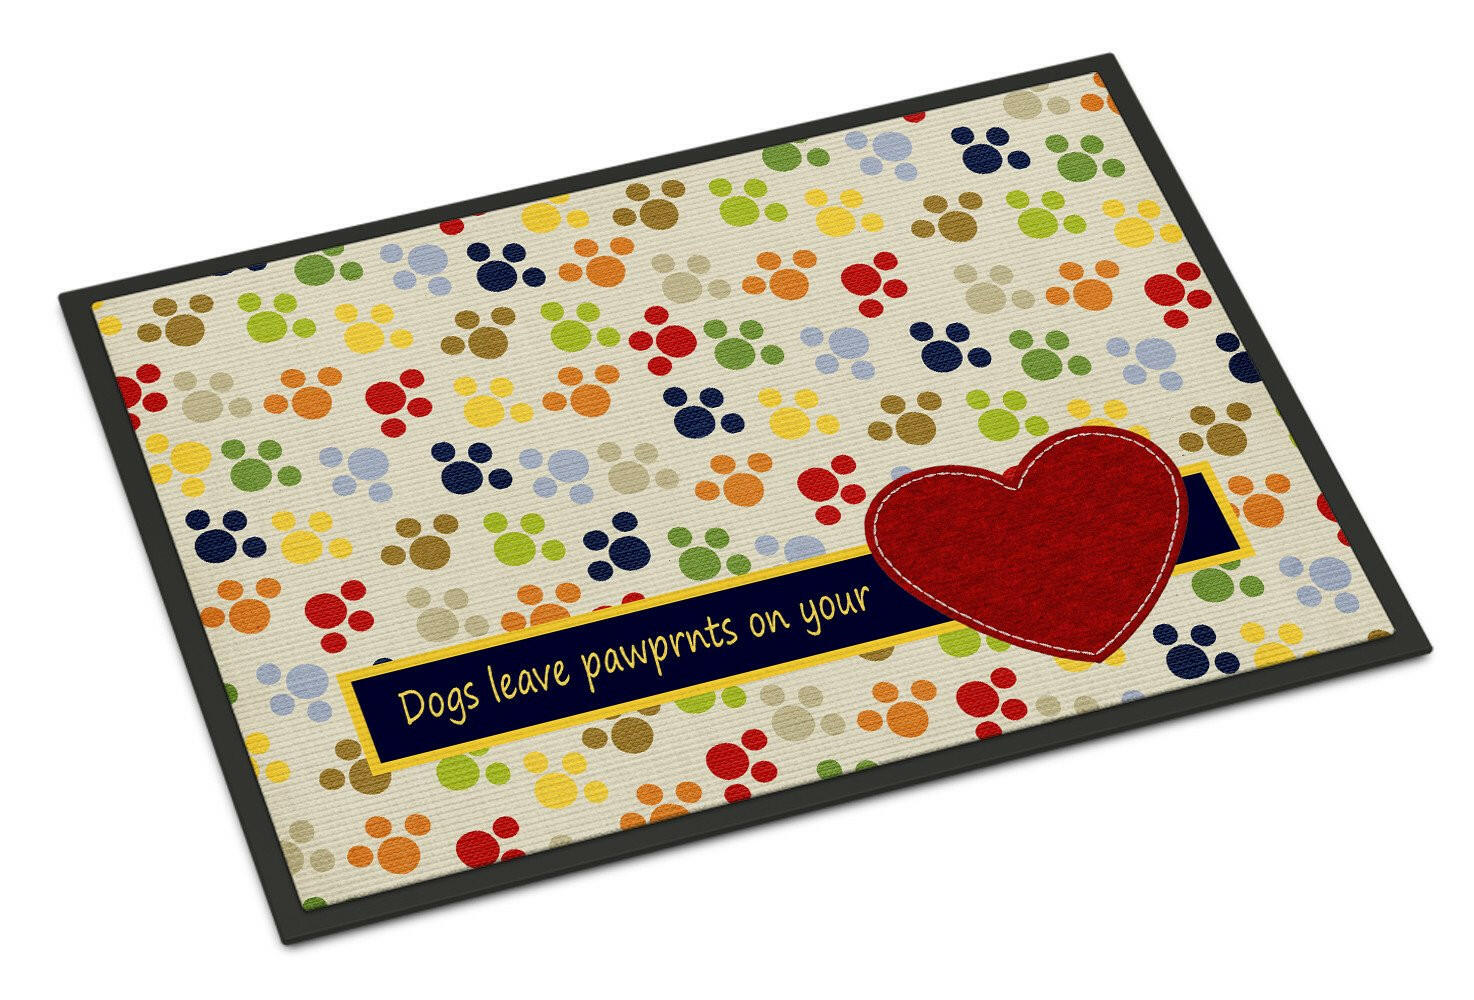 Dogs leave pawprints on your heart Indoor or Outdoor Mat 18x27 SB3054MAT - the-store.com